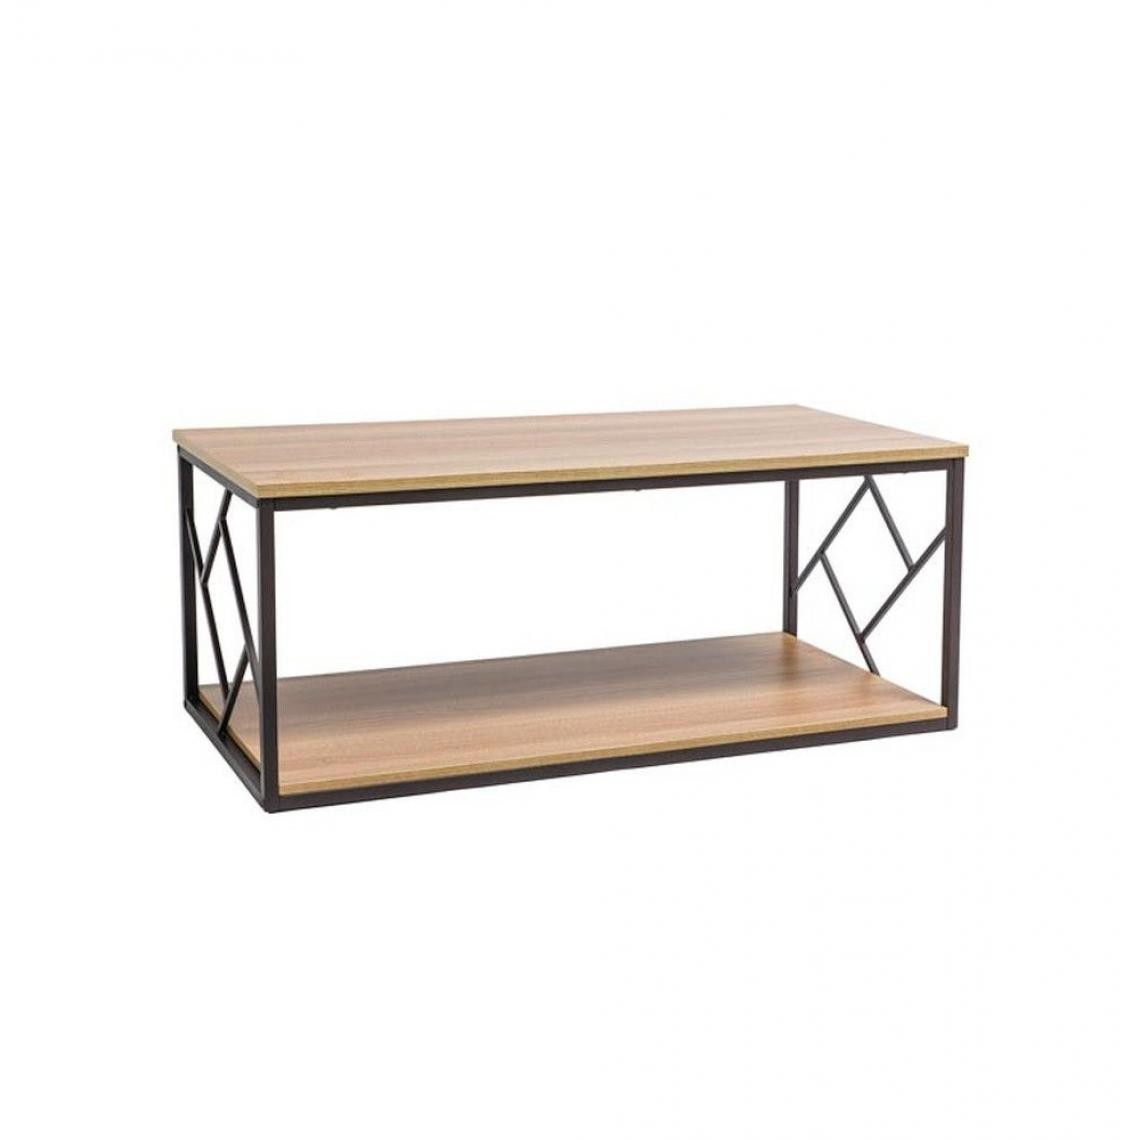 Ac-Deco - Table basse en bois - L 111 cm x l 51 cm x H 45 cm - Tablo - Tables basses